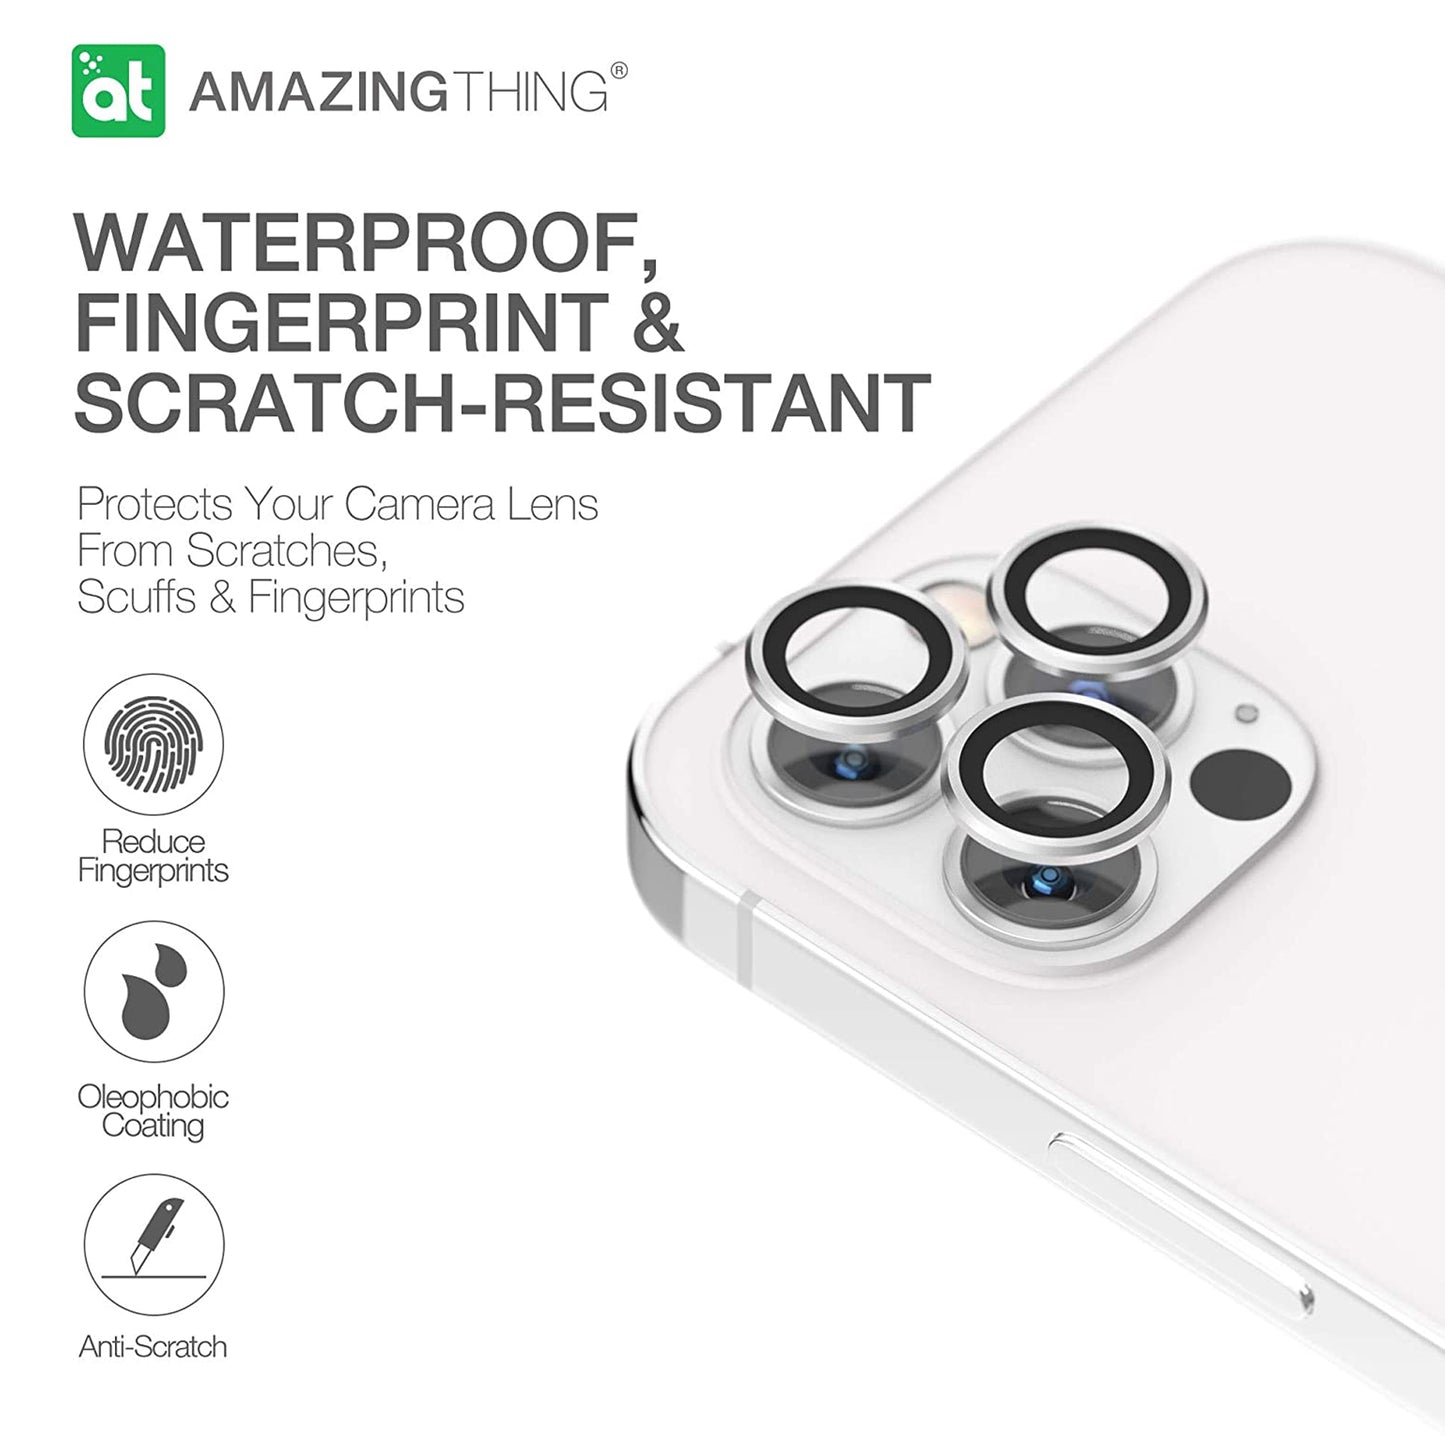 AMAZINGthing SUPREME AR 3D LensGlass Protector for iPhone 13 Pro 6.1" 5G ( Three Lens ) - Gray (Barcode: 4892878069496 )